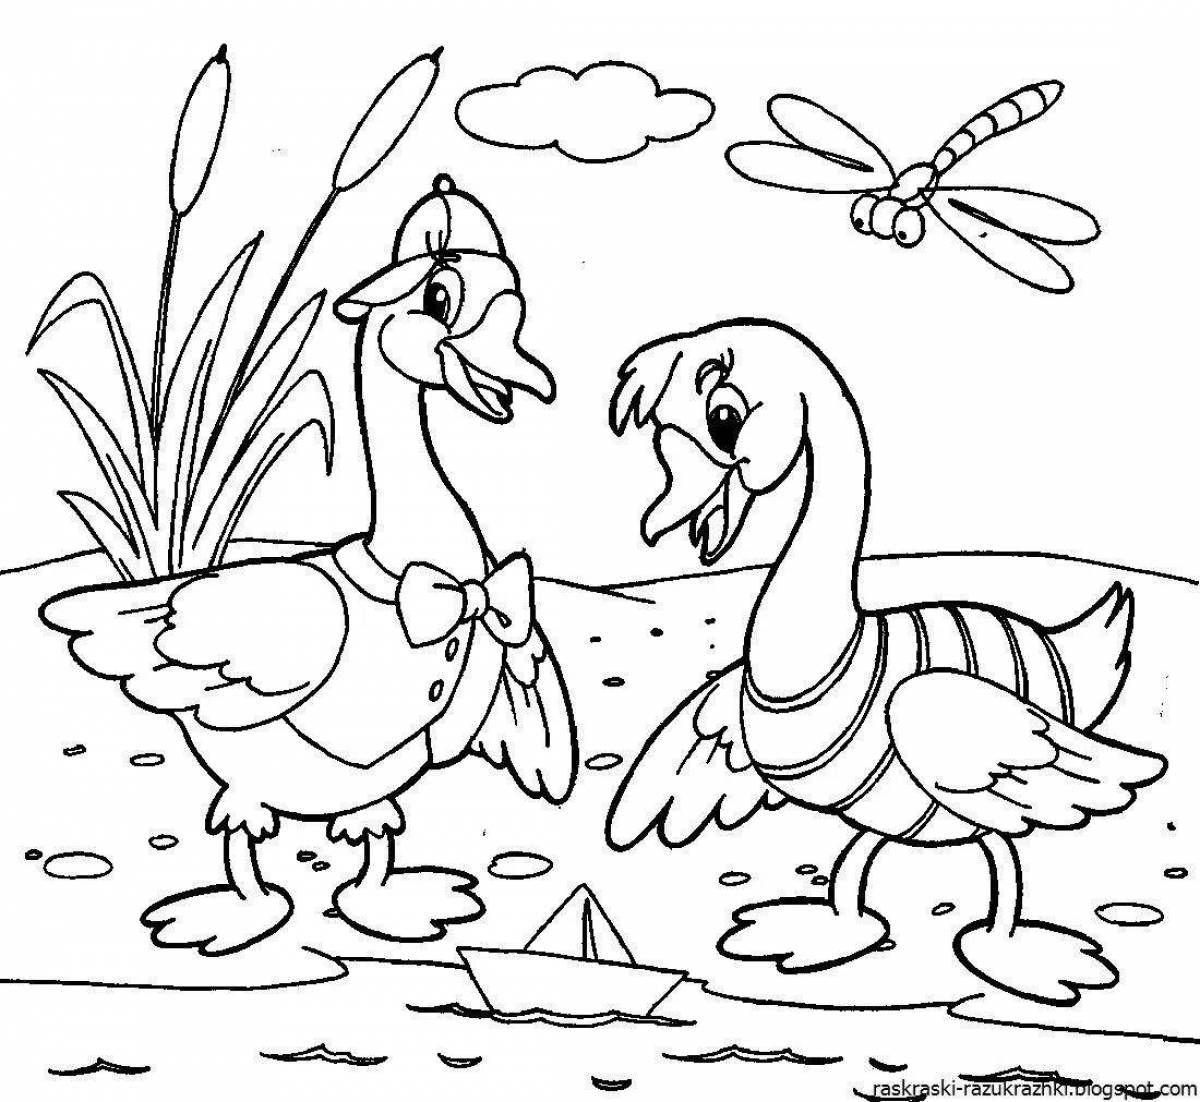 Cute bird coloring pages for 6-7 year olds